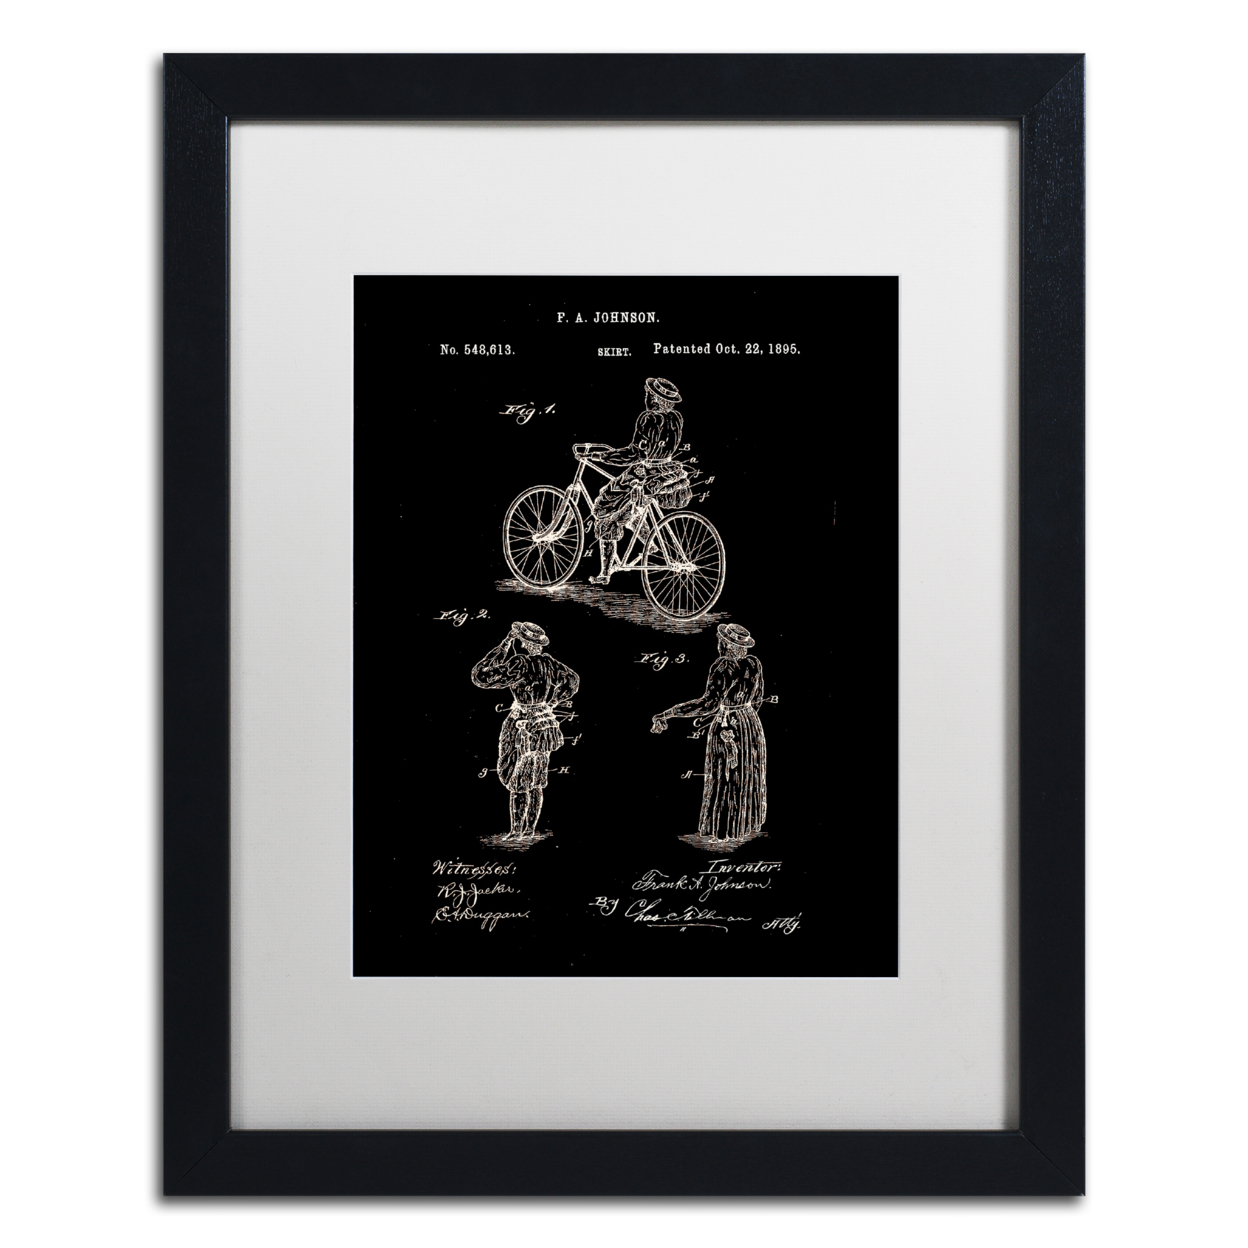 Claire Doherty 'Cycling Skirt Patent 1885 Black' Black Wooden Framed Art 18 X 22 Inches